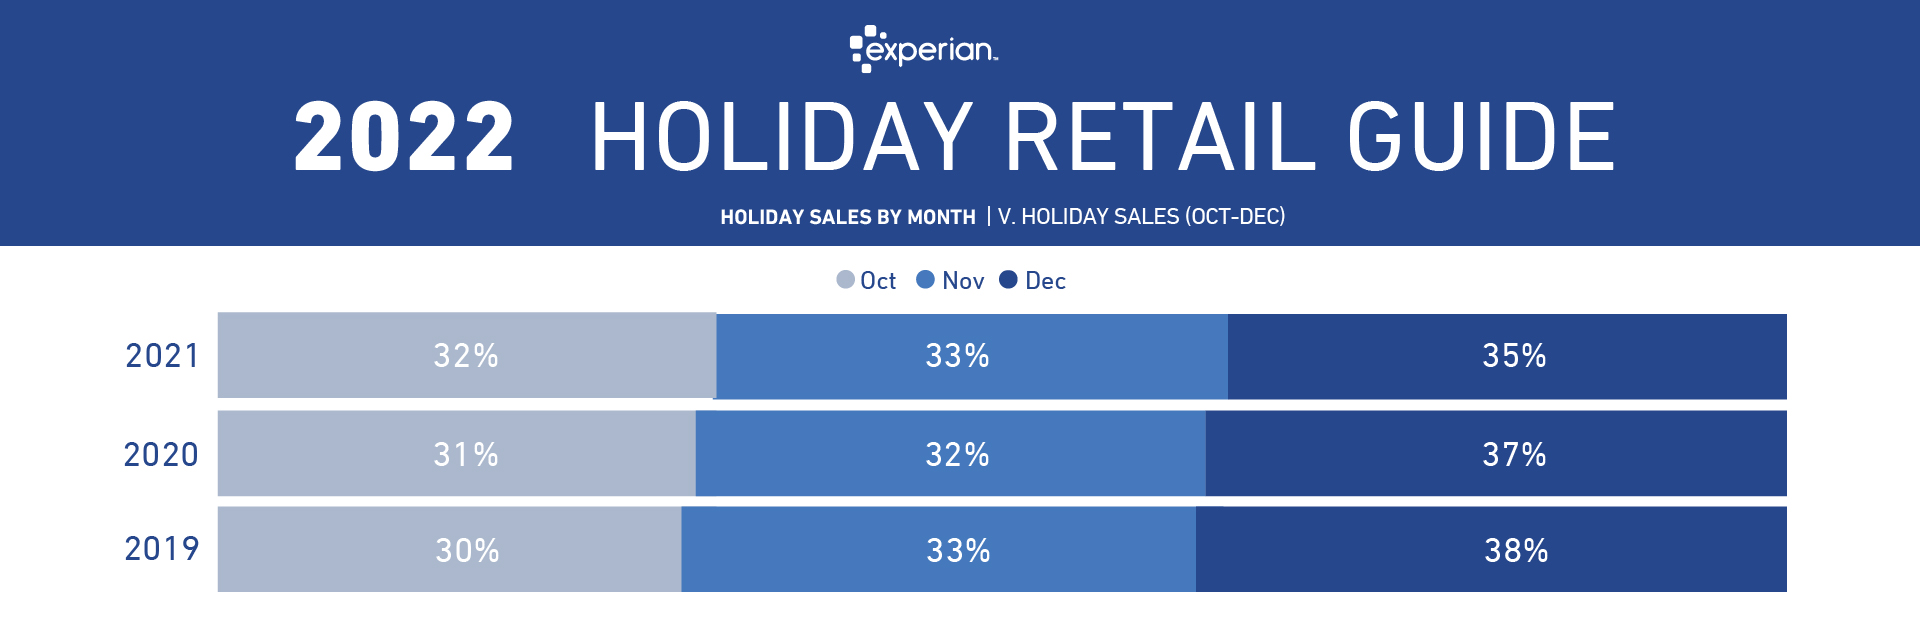 Holiday retail sales by month